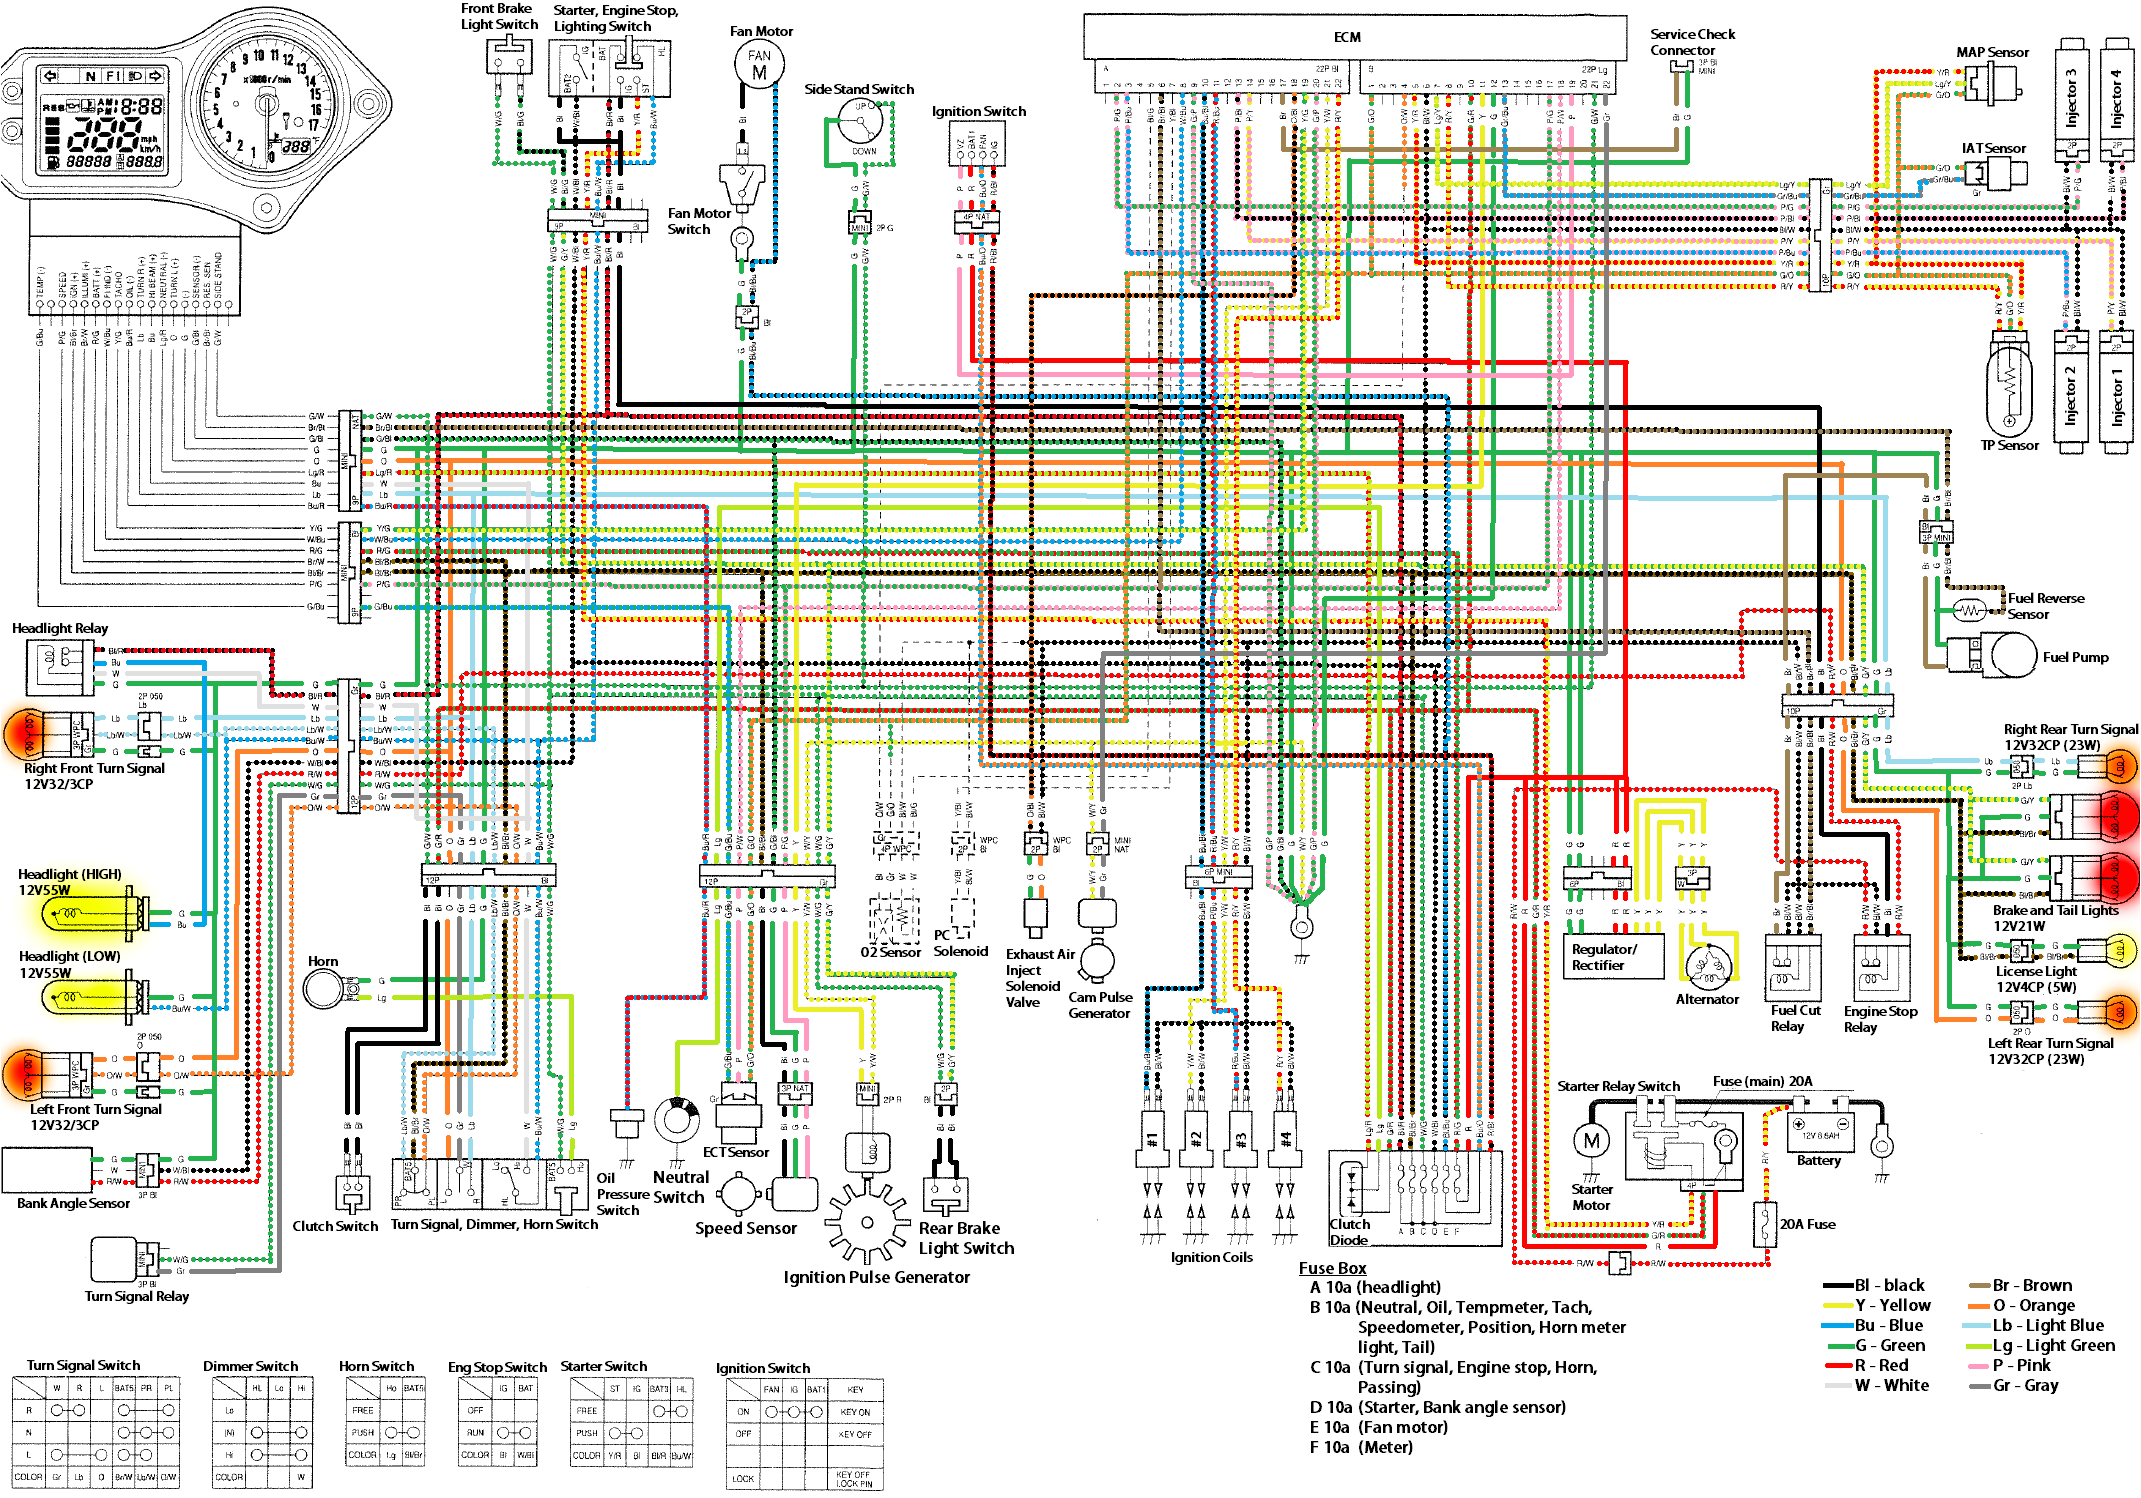 re 1988 honda zb50 wiring diagram electronic schematics collections png